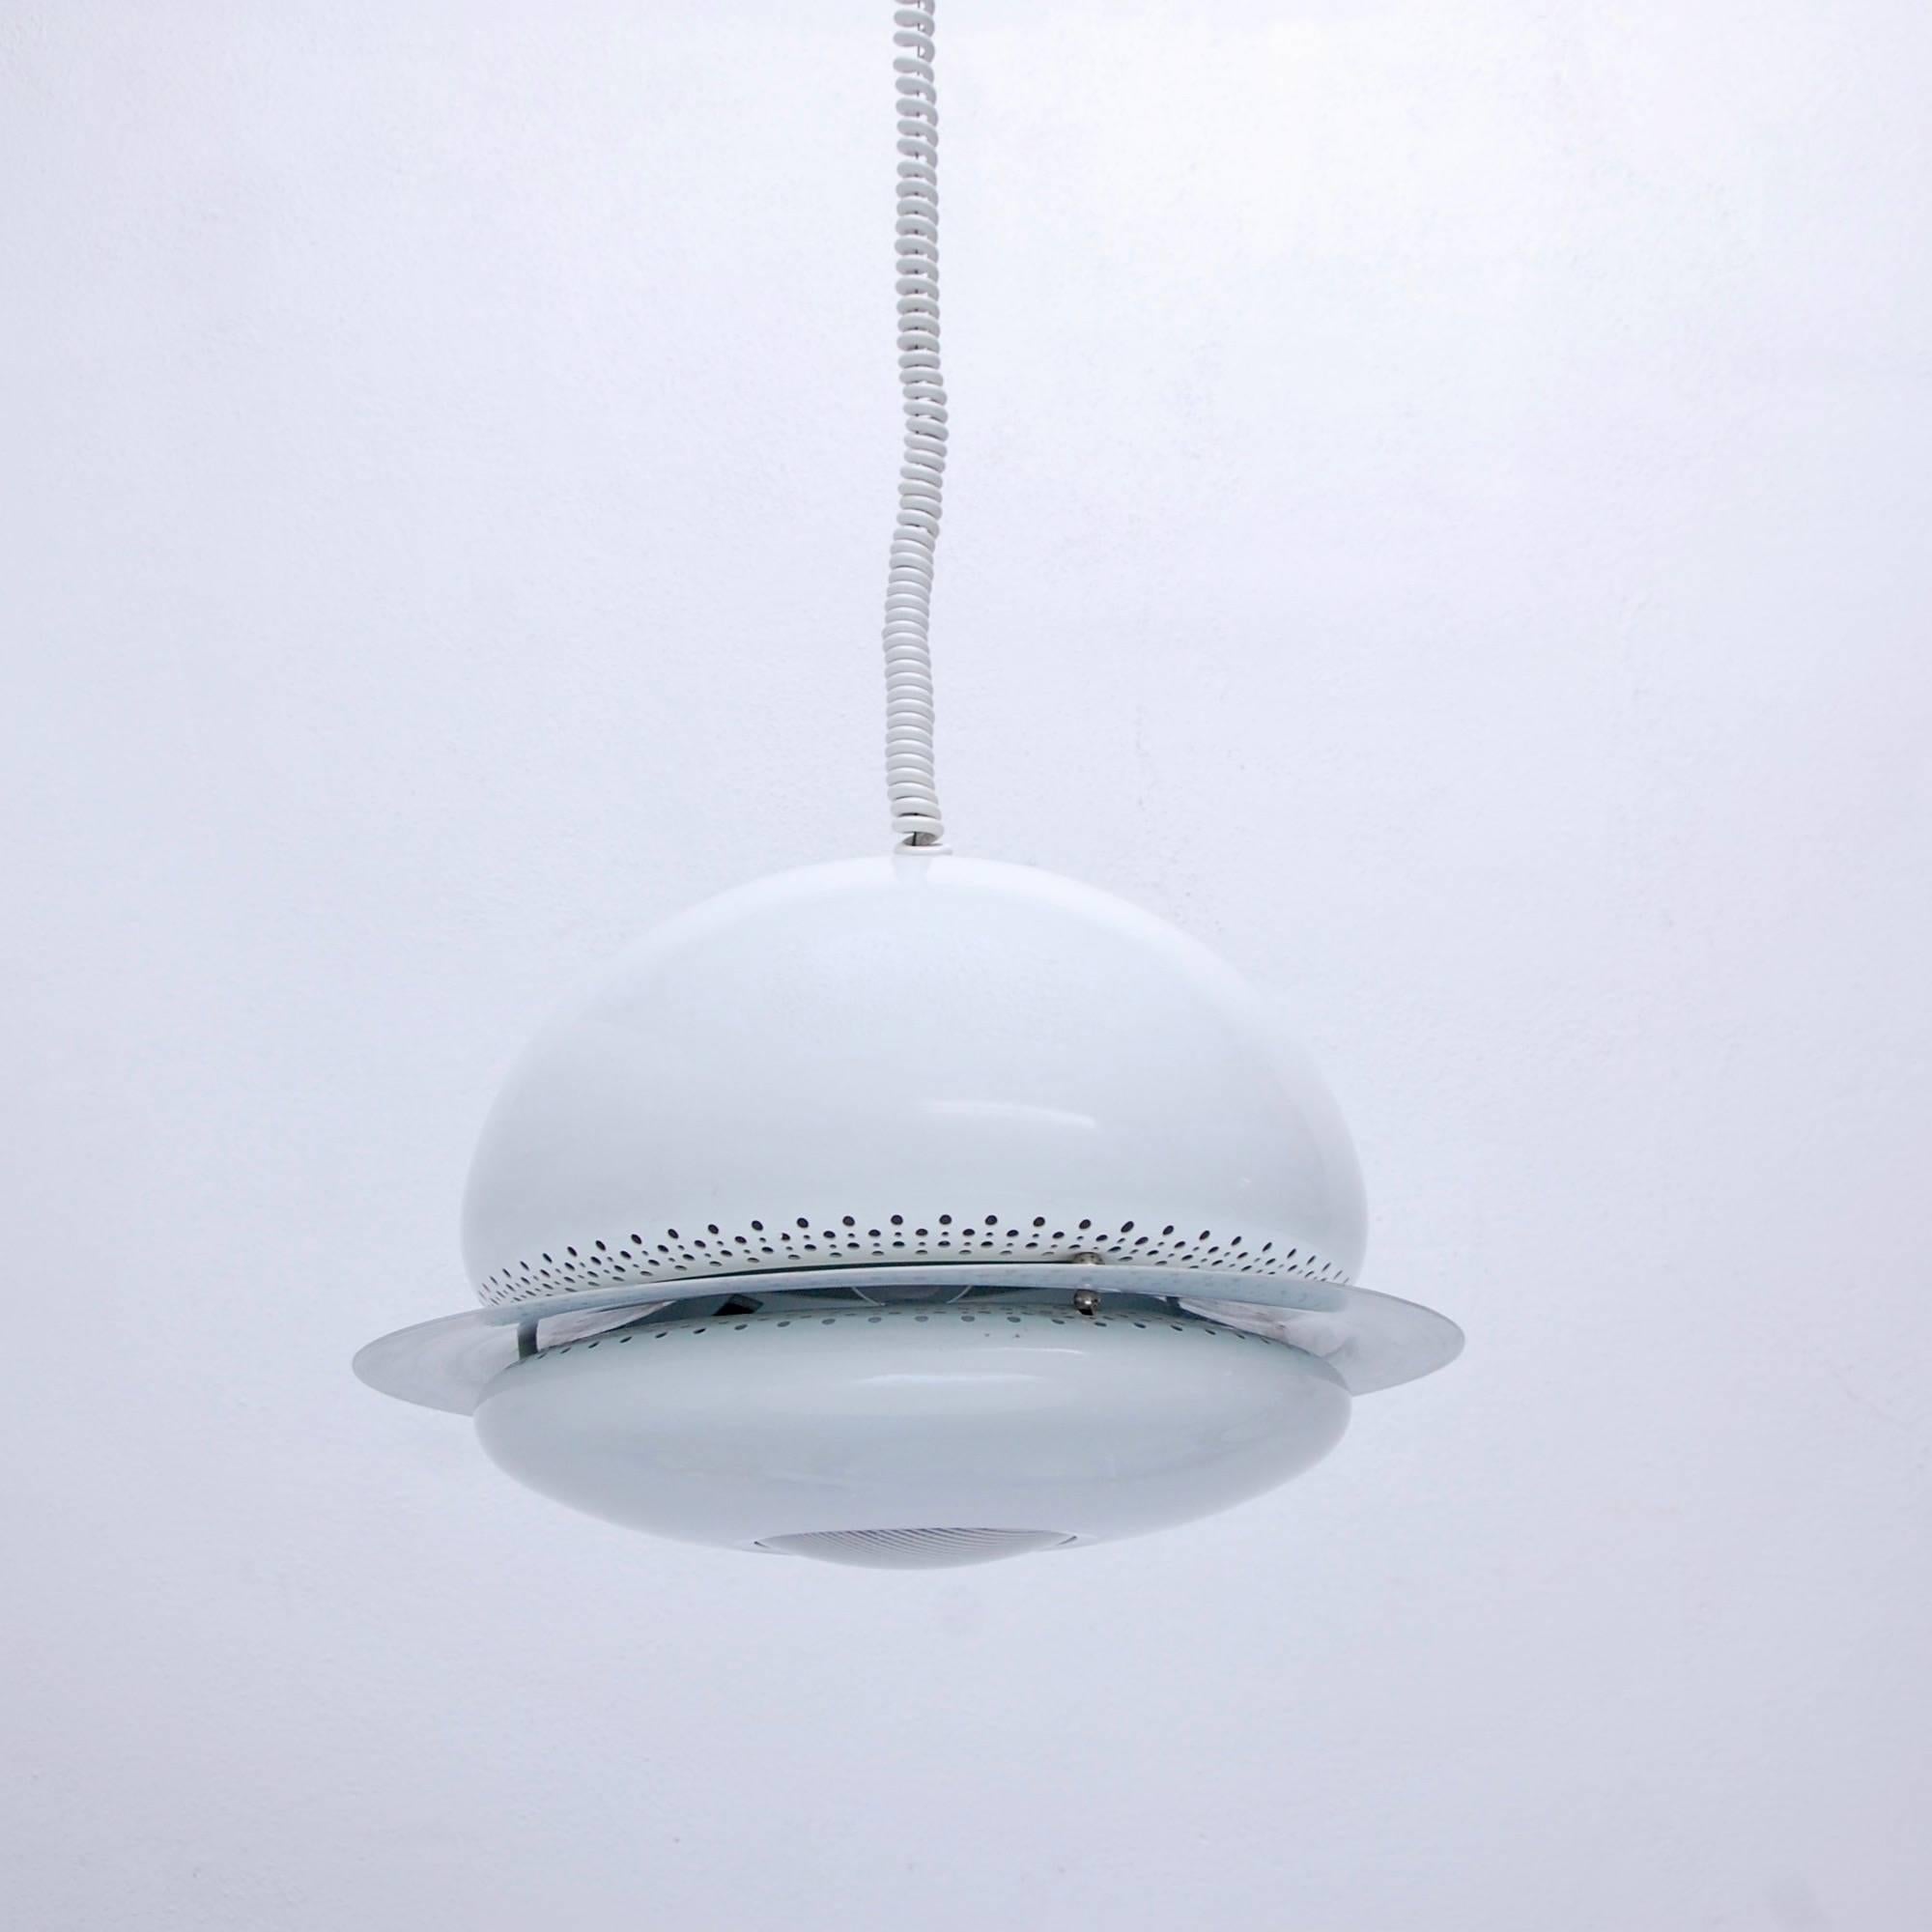 Breathtaking “Nictea” pendant in painted white by Tobia Scarpa of Italy. Overall drop adjustable upon request. Single medium based socket. With original telephone wire cable.
Measurements:
Diameter 19”
Height 12.5”
Current OAD 38”.
 